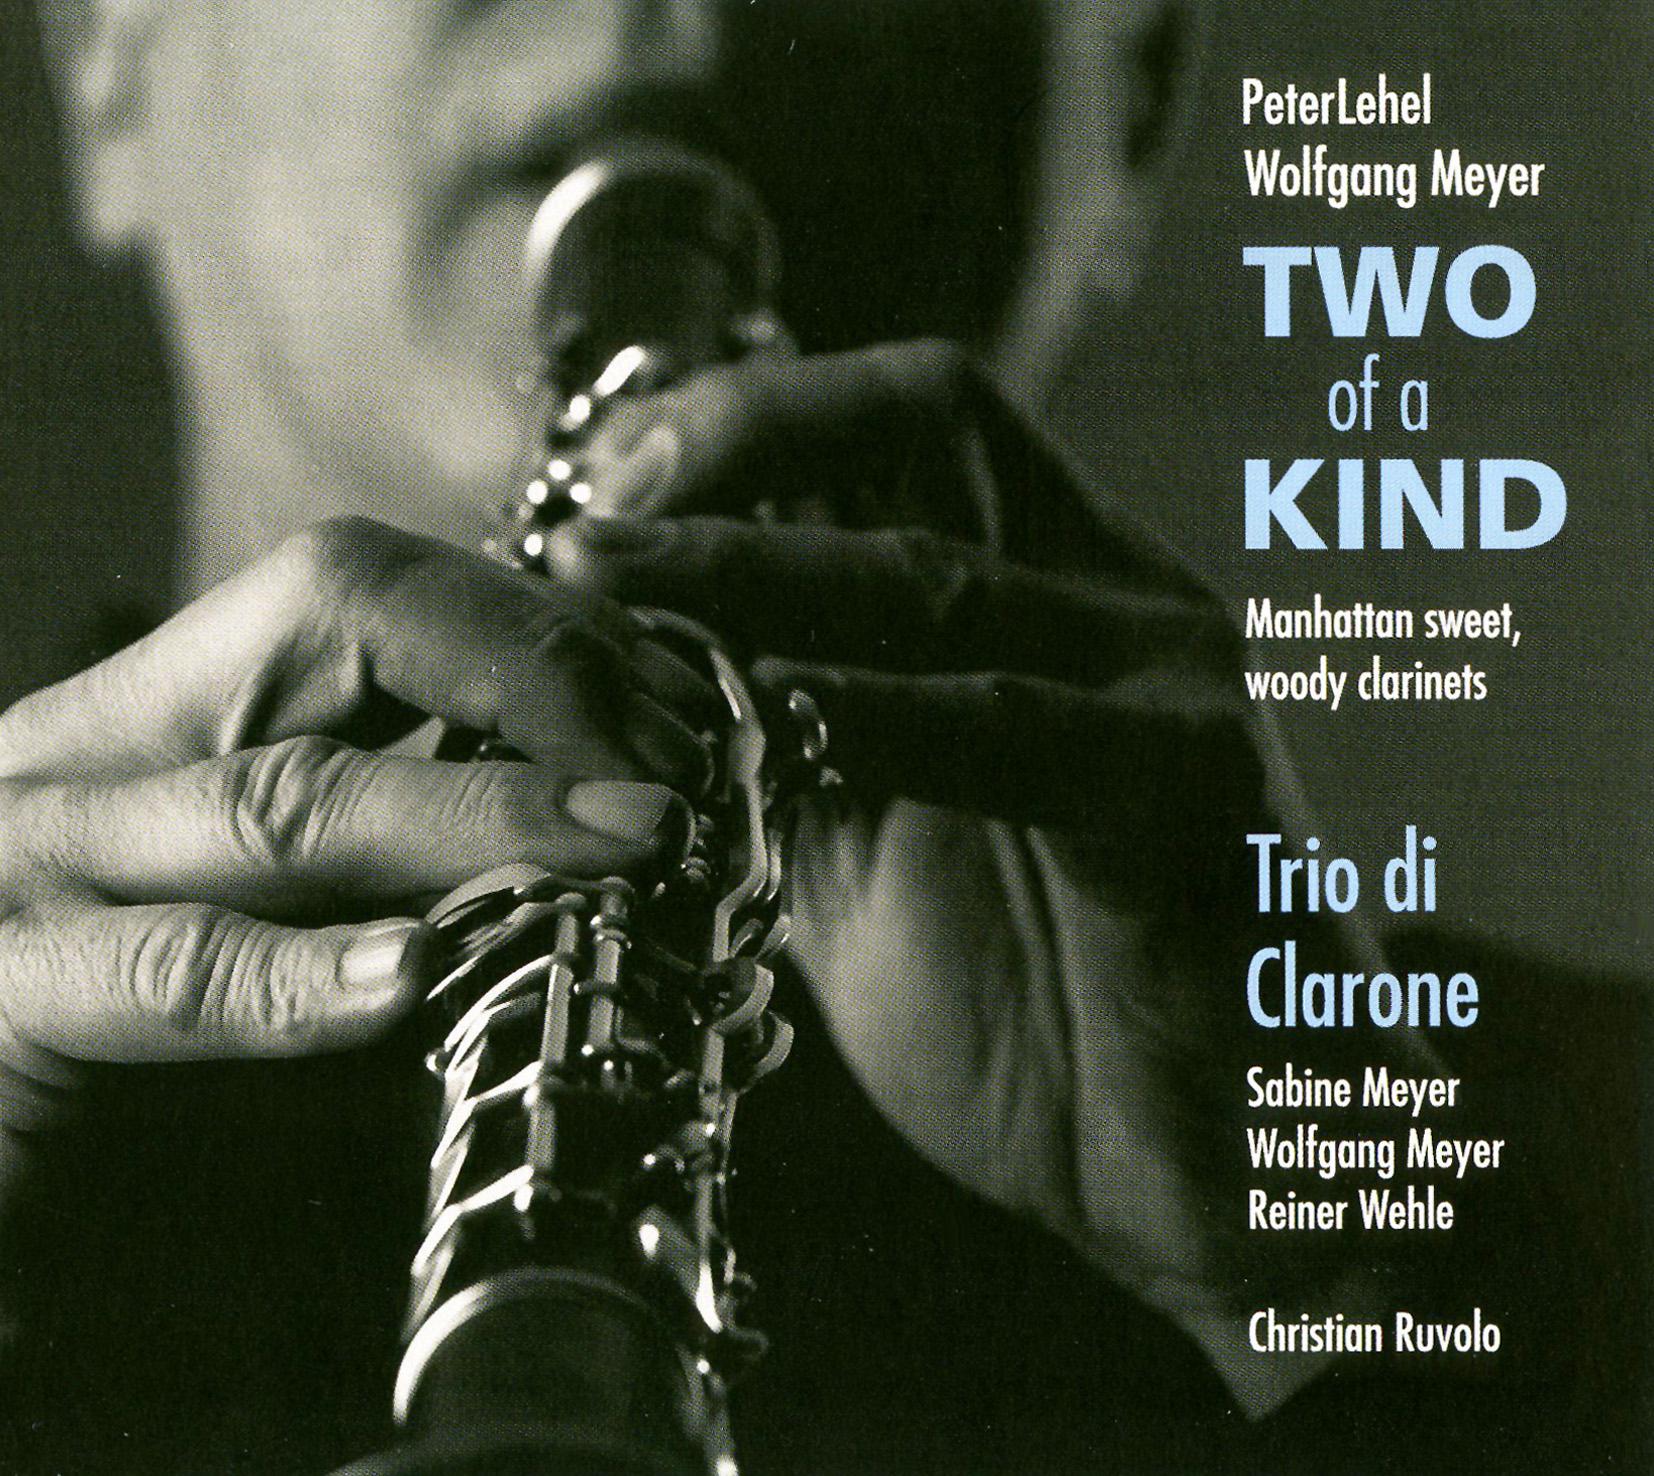 Two of a kind: No. 3. Count 3 and 2